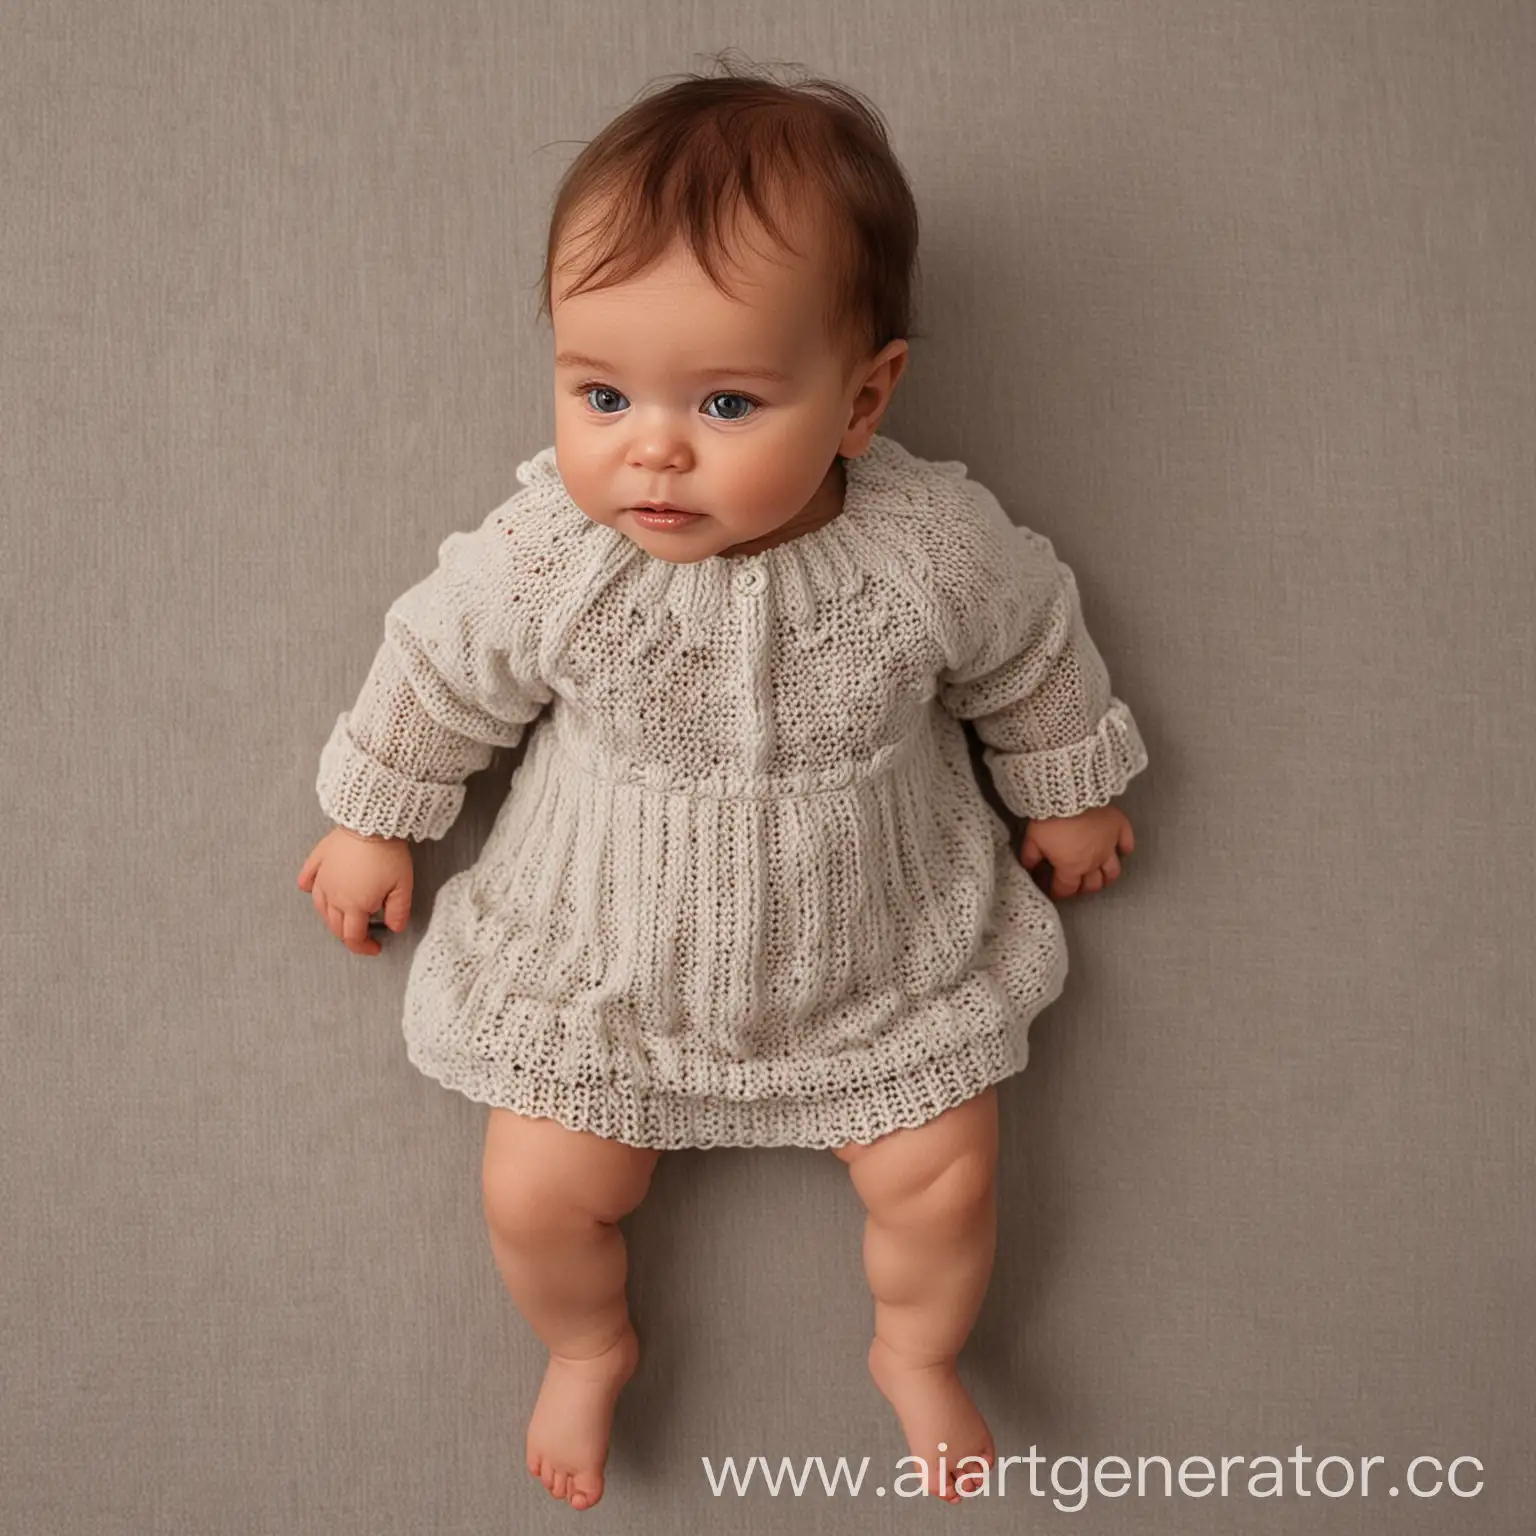 a baby in a knitted dress